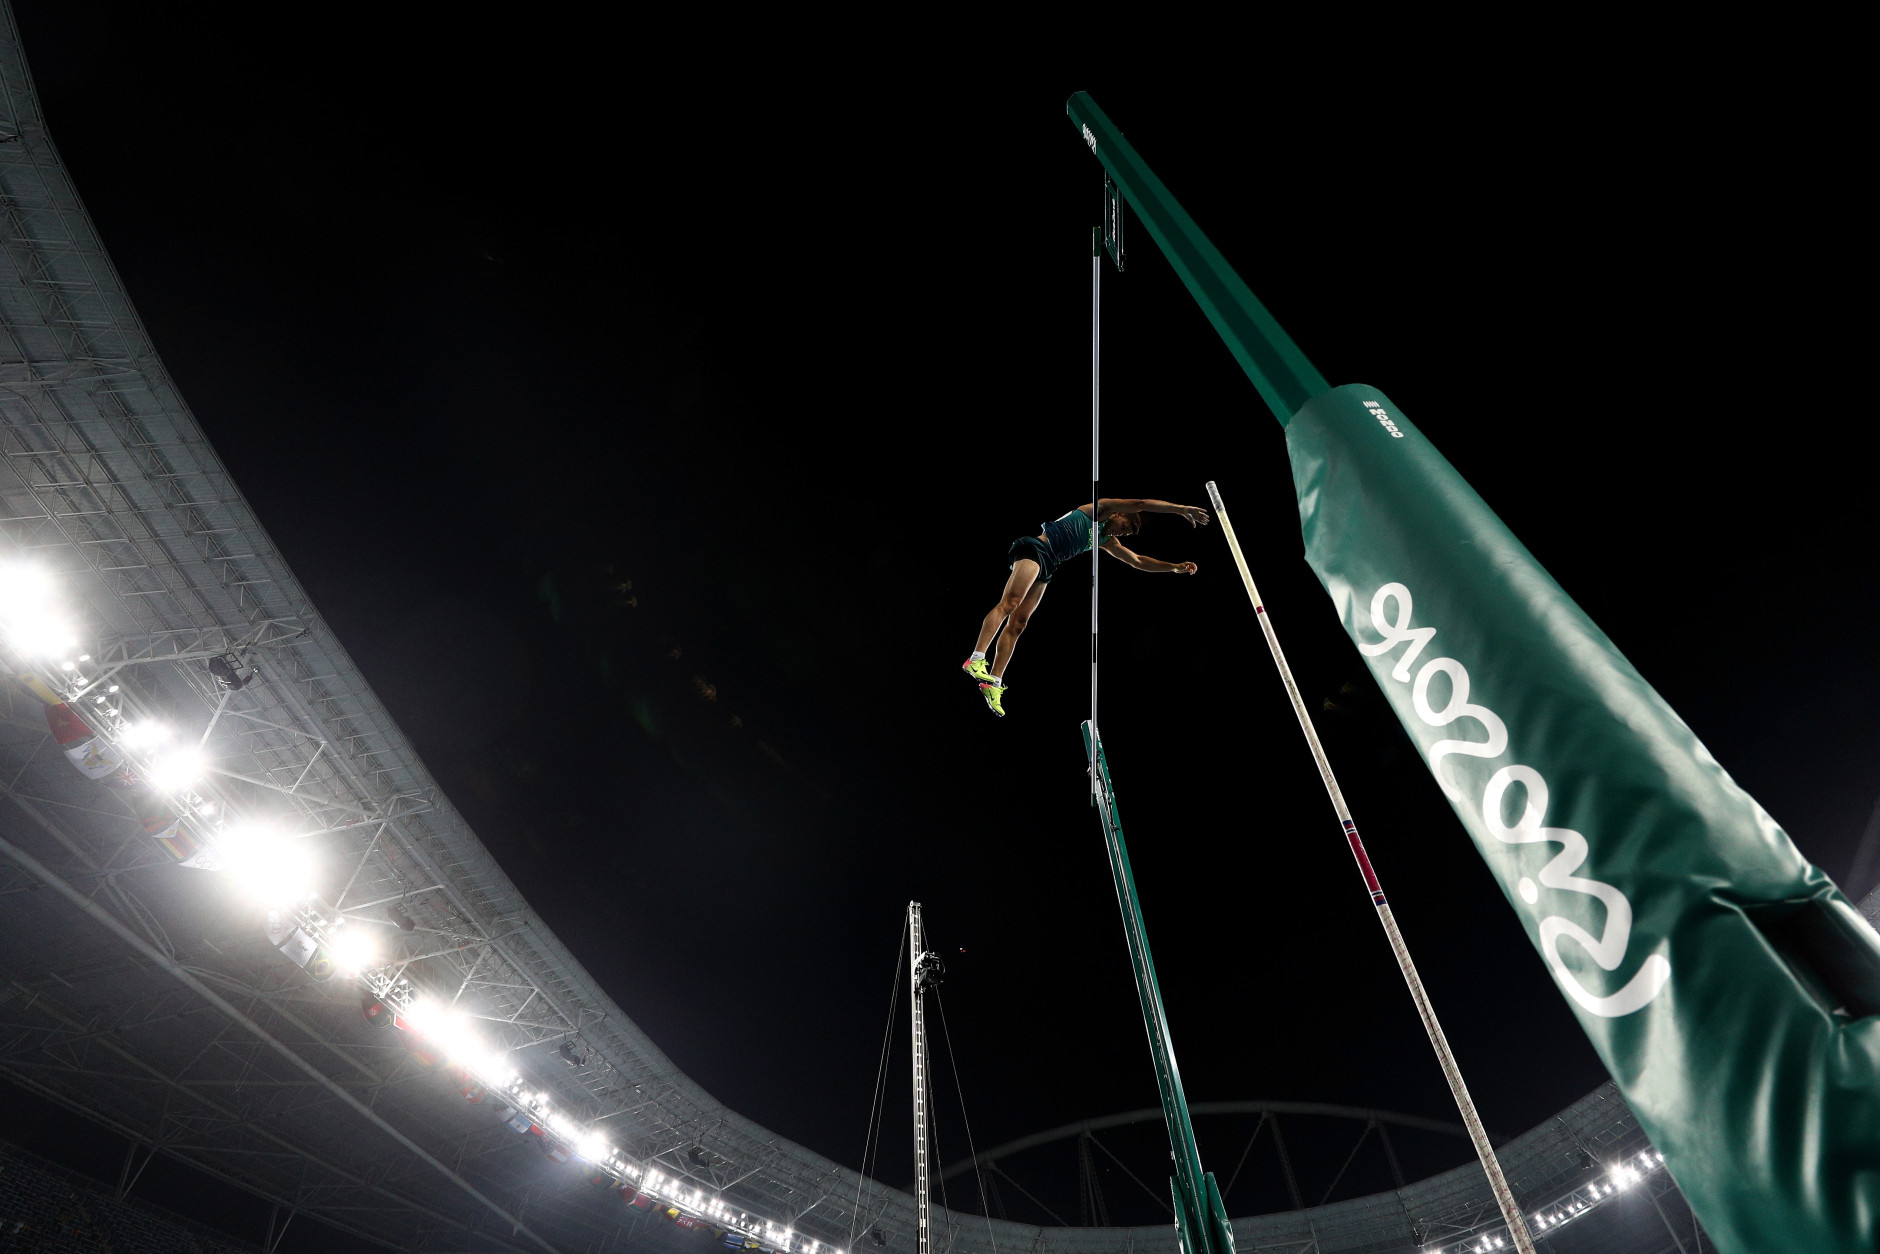 RIO DE JANEIRO, BRAZIL - AUGUST 15:  Thiago Braz da Silva of Brazil competes in the Men's Pole Vault final on Day 10 of the Rio 2016 Olympic Games at the Olympic Stadium on August 15, 2016 in Rio de Janeiro, Brazil.  (Photo by Paul Gilham/Getty Images)